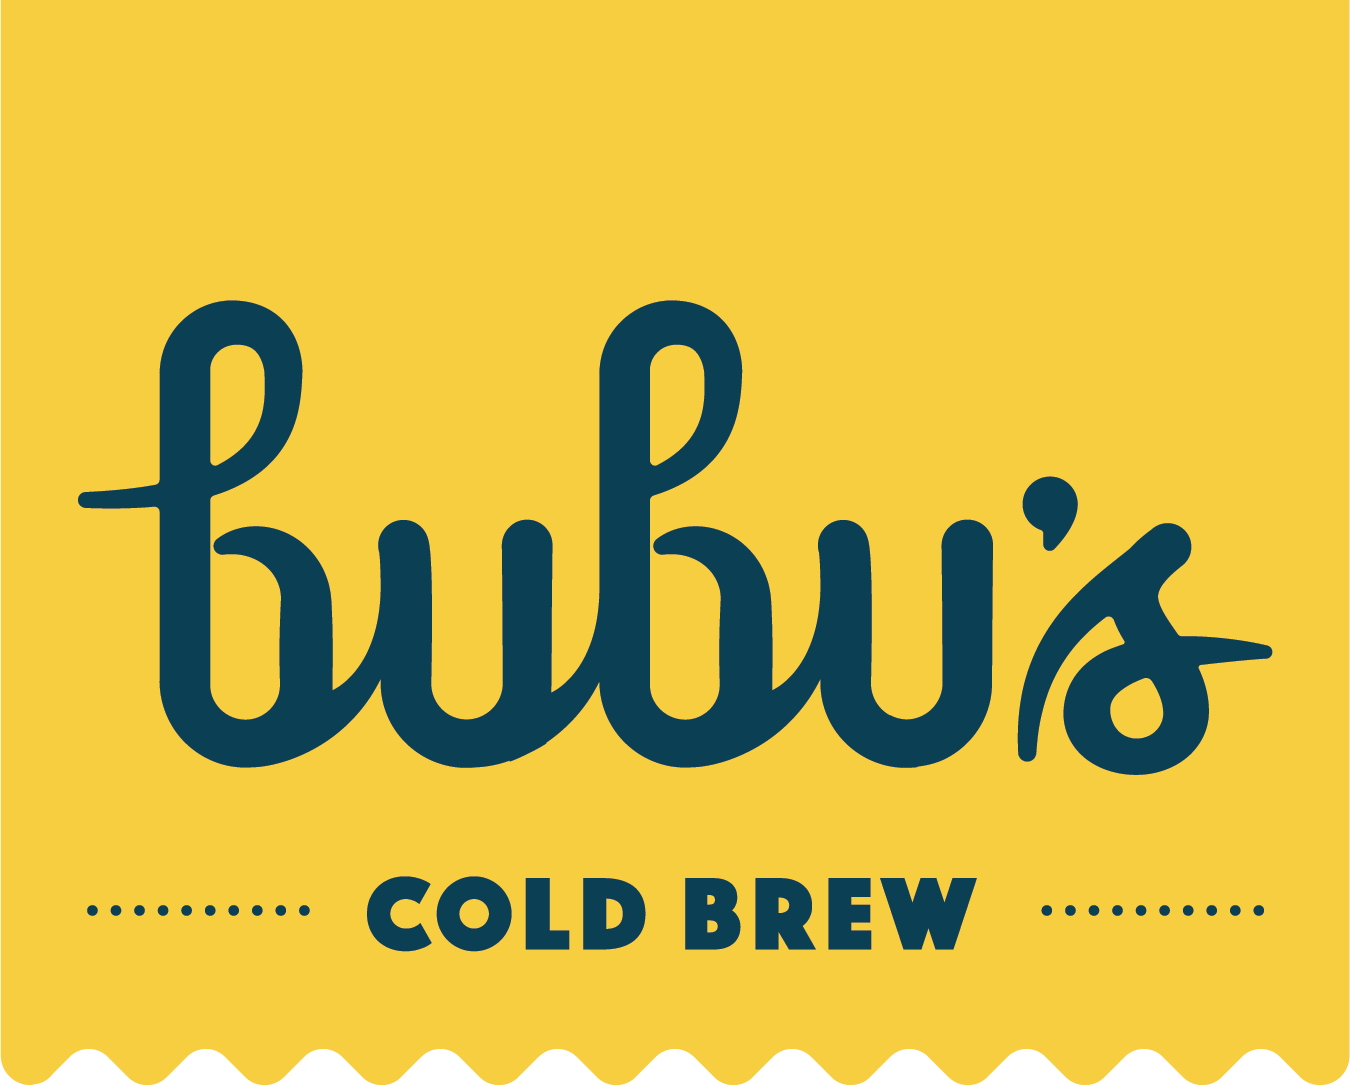 You are currently viewing bubu’s Cold Brew